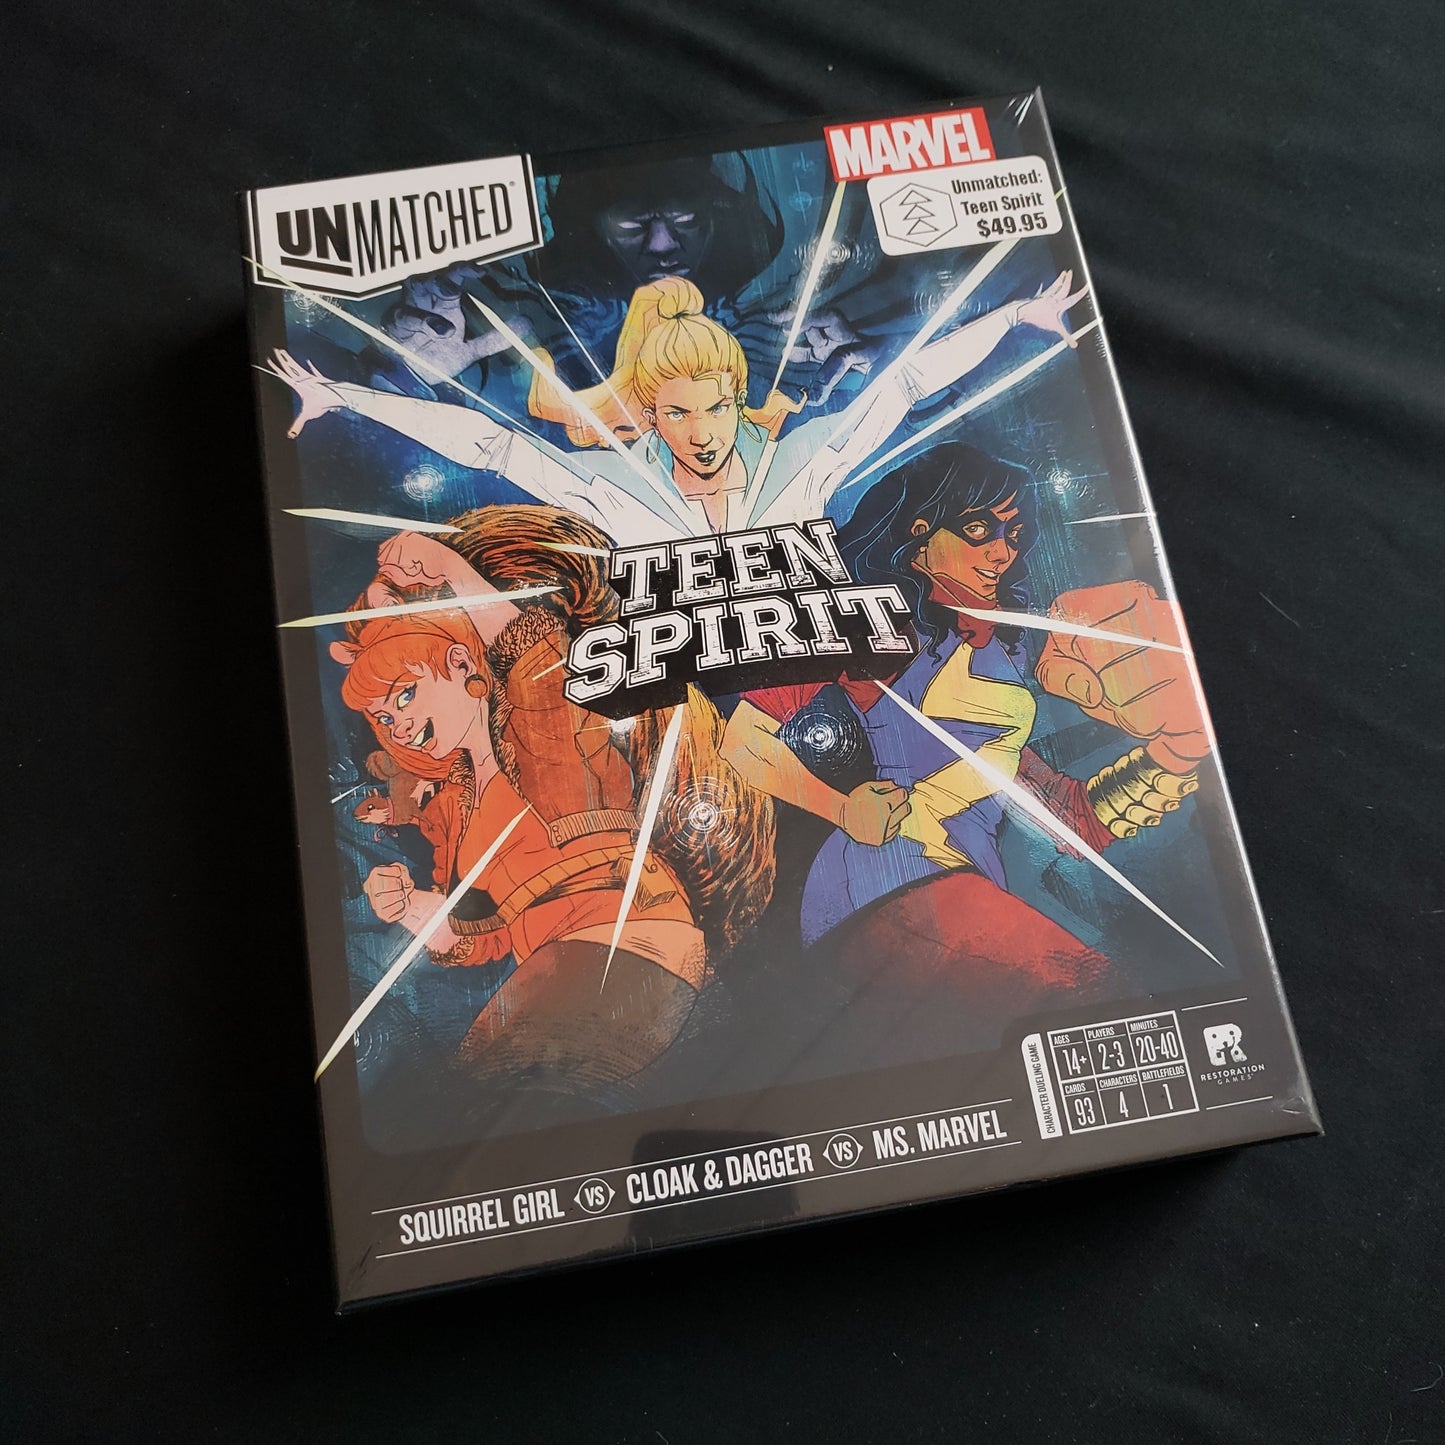 Image shows the front cover of the box of the Unmatched: Teen Spirit board game